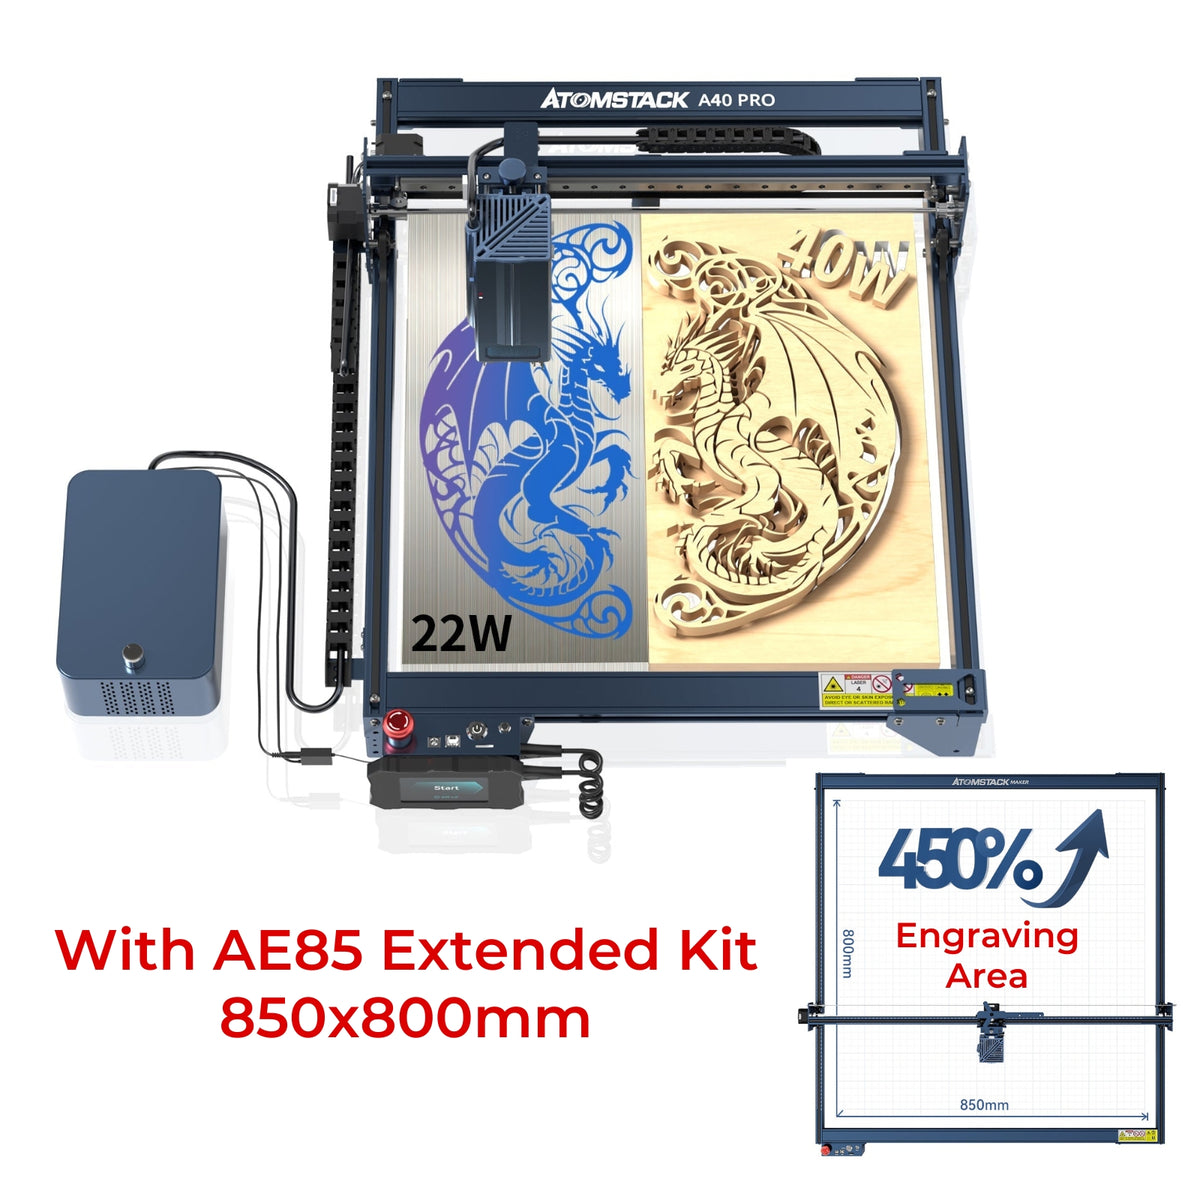 AtomStack A40 Pro Laser Machine with F60 Air Assist Kit and AE85 Extended Kit 850x800mm